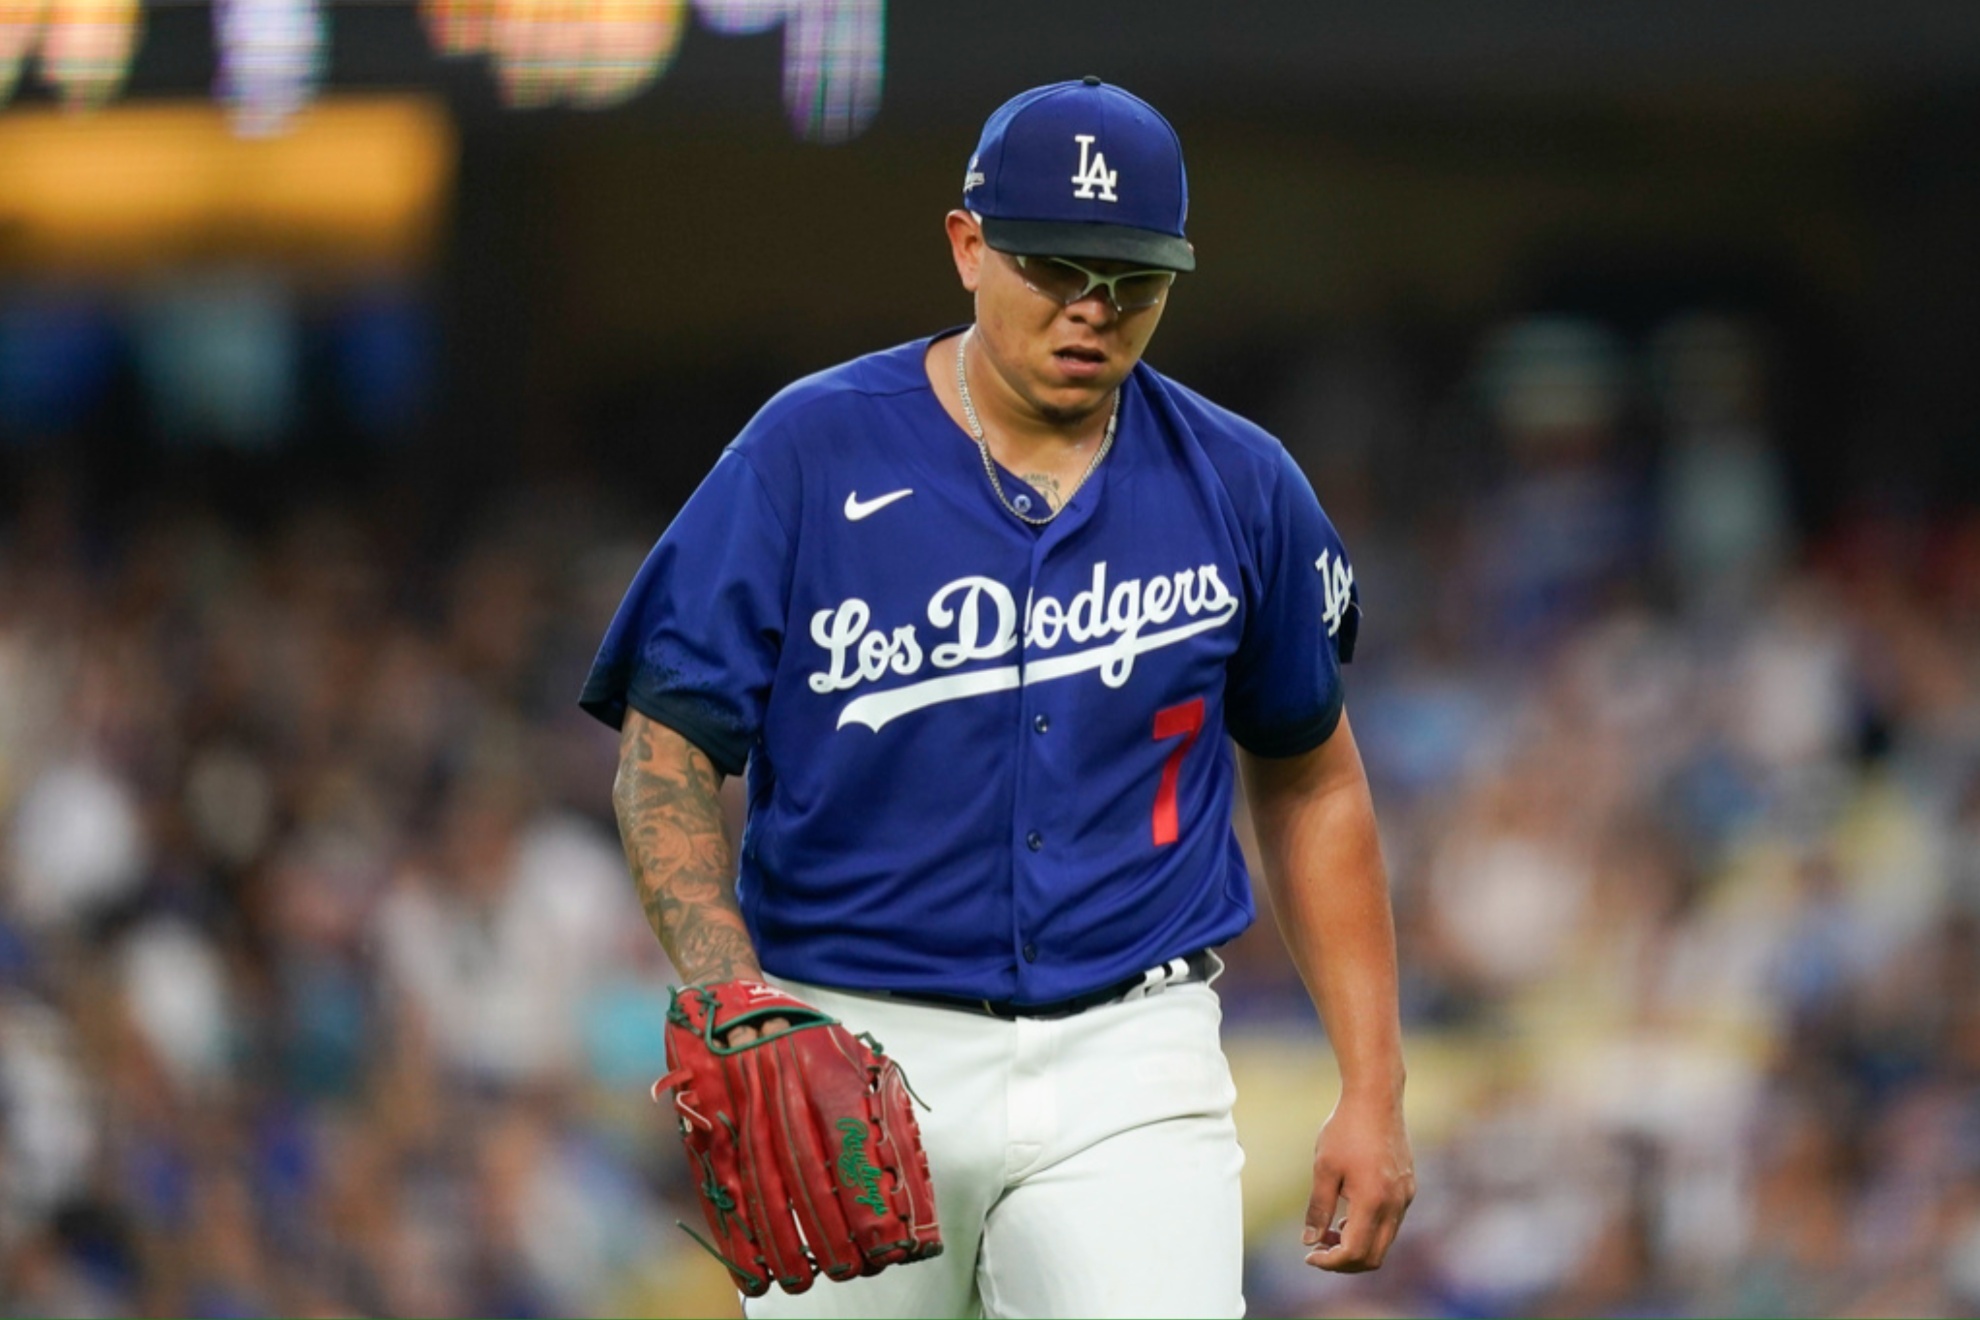 Los Angeles Dodgers pitcher Julio Urias was arrested on Sunday night